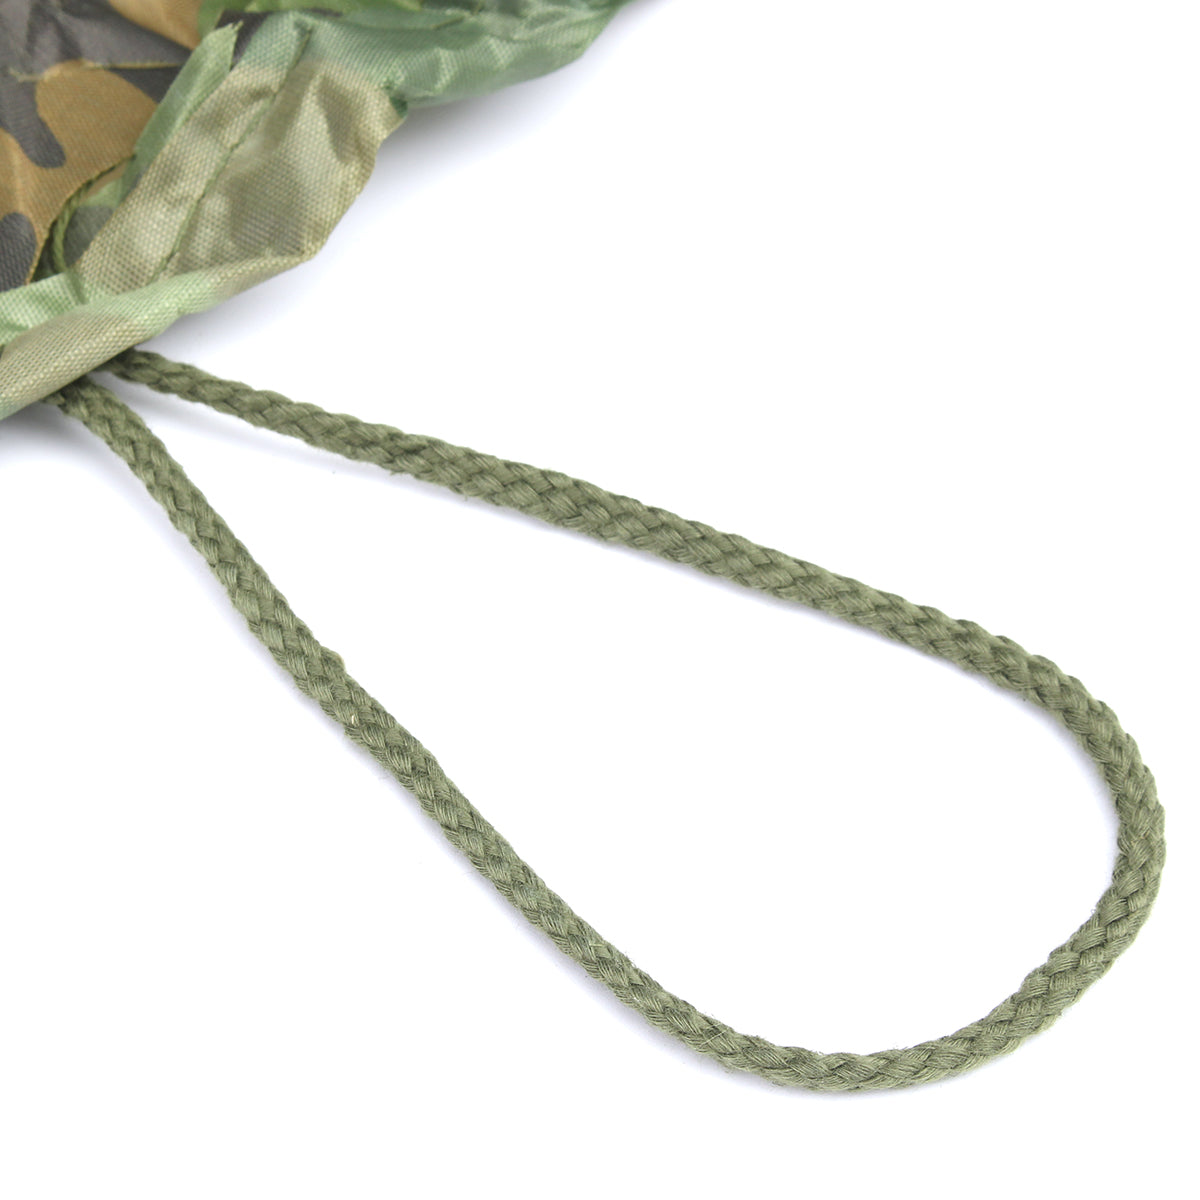 Snow 4mX6m Jungle Camo Netting Camouflage Net for Car Cover Camping Woodland Military Hunting